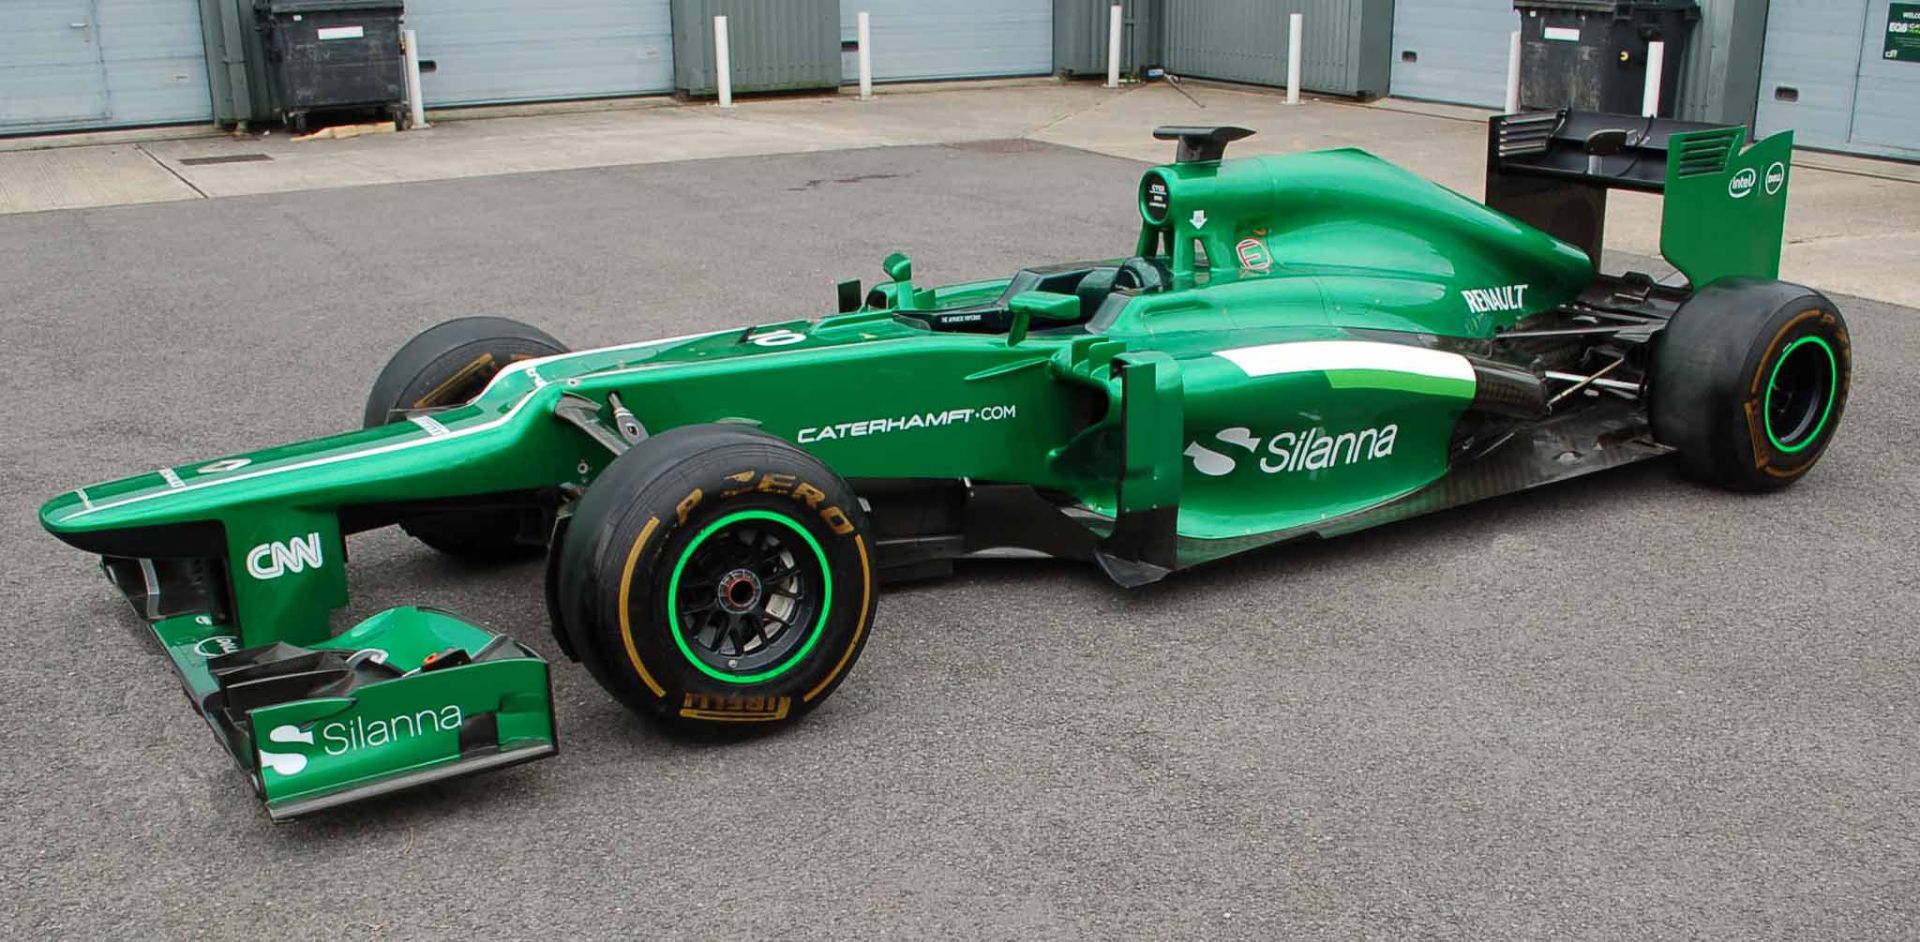 A CATERHAM F1 2013 Formula 1 Full Rolling Chassis, Chassis No. CT03-5 (No Engine or Gearbox), - Image 5 of 8